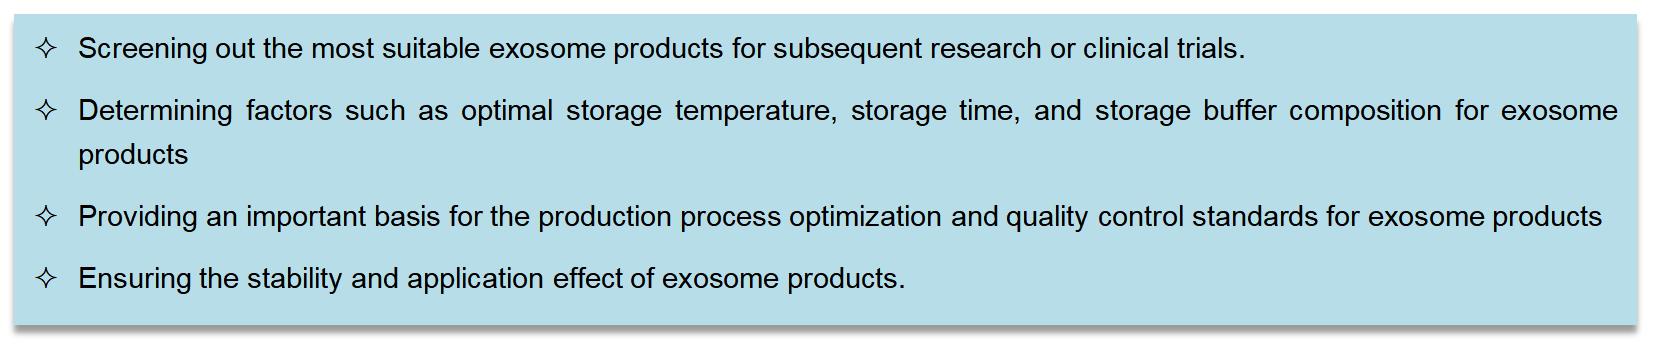 Why Need To Evaluate the Stability of Exosome Products?